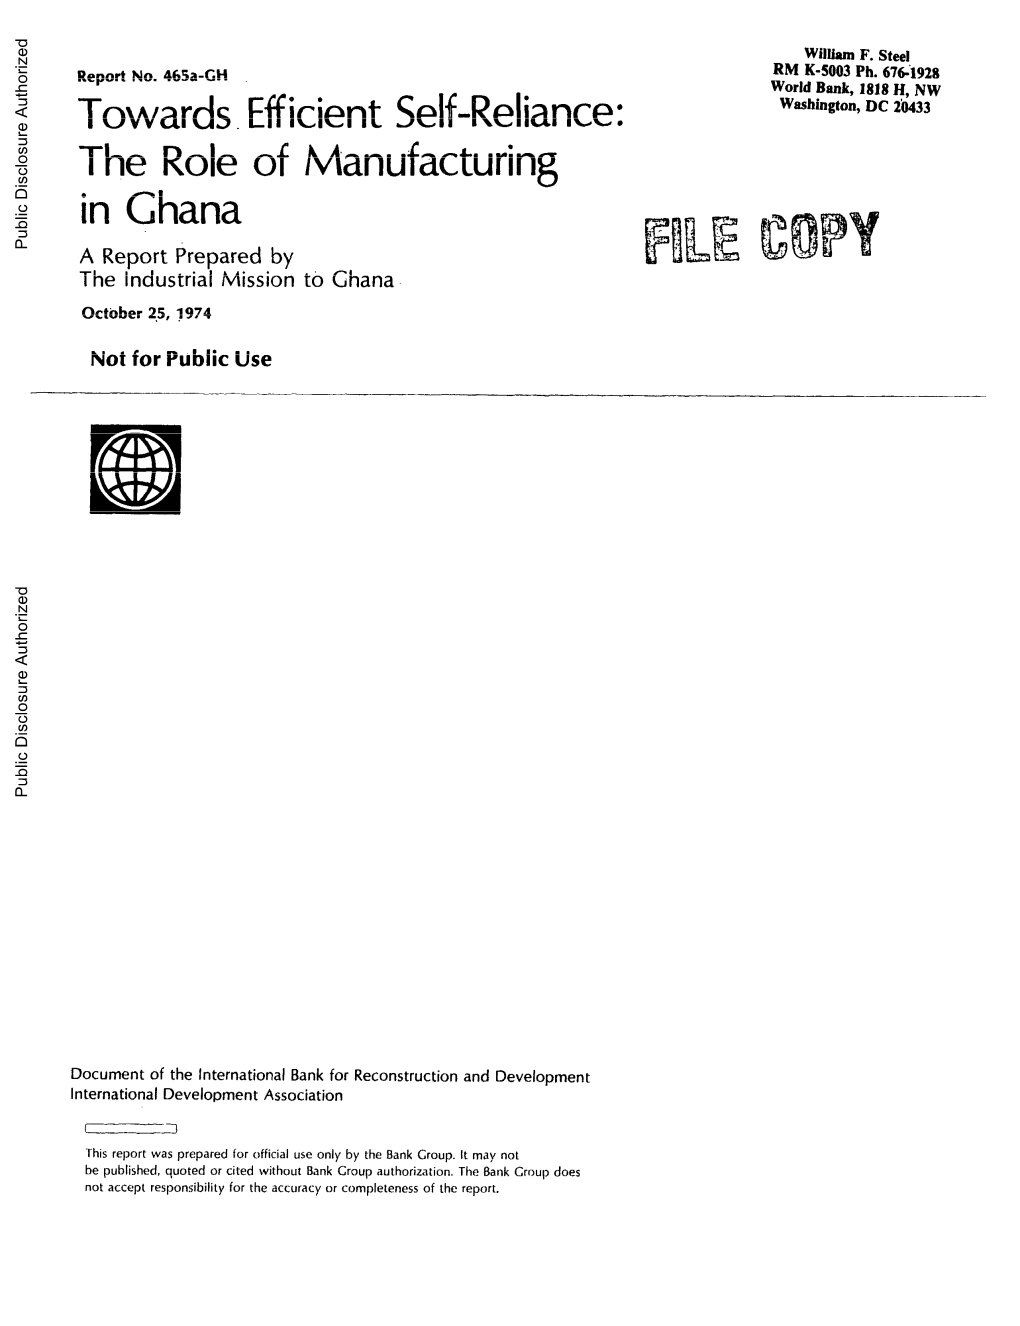 Ghana Public Disclosure Authorized a Report Prepared by the Industrial Mission to Ghana October 25, 1974